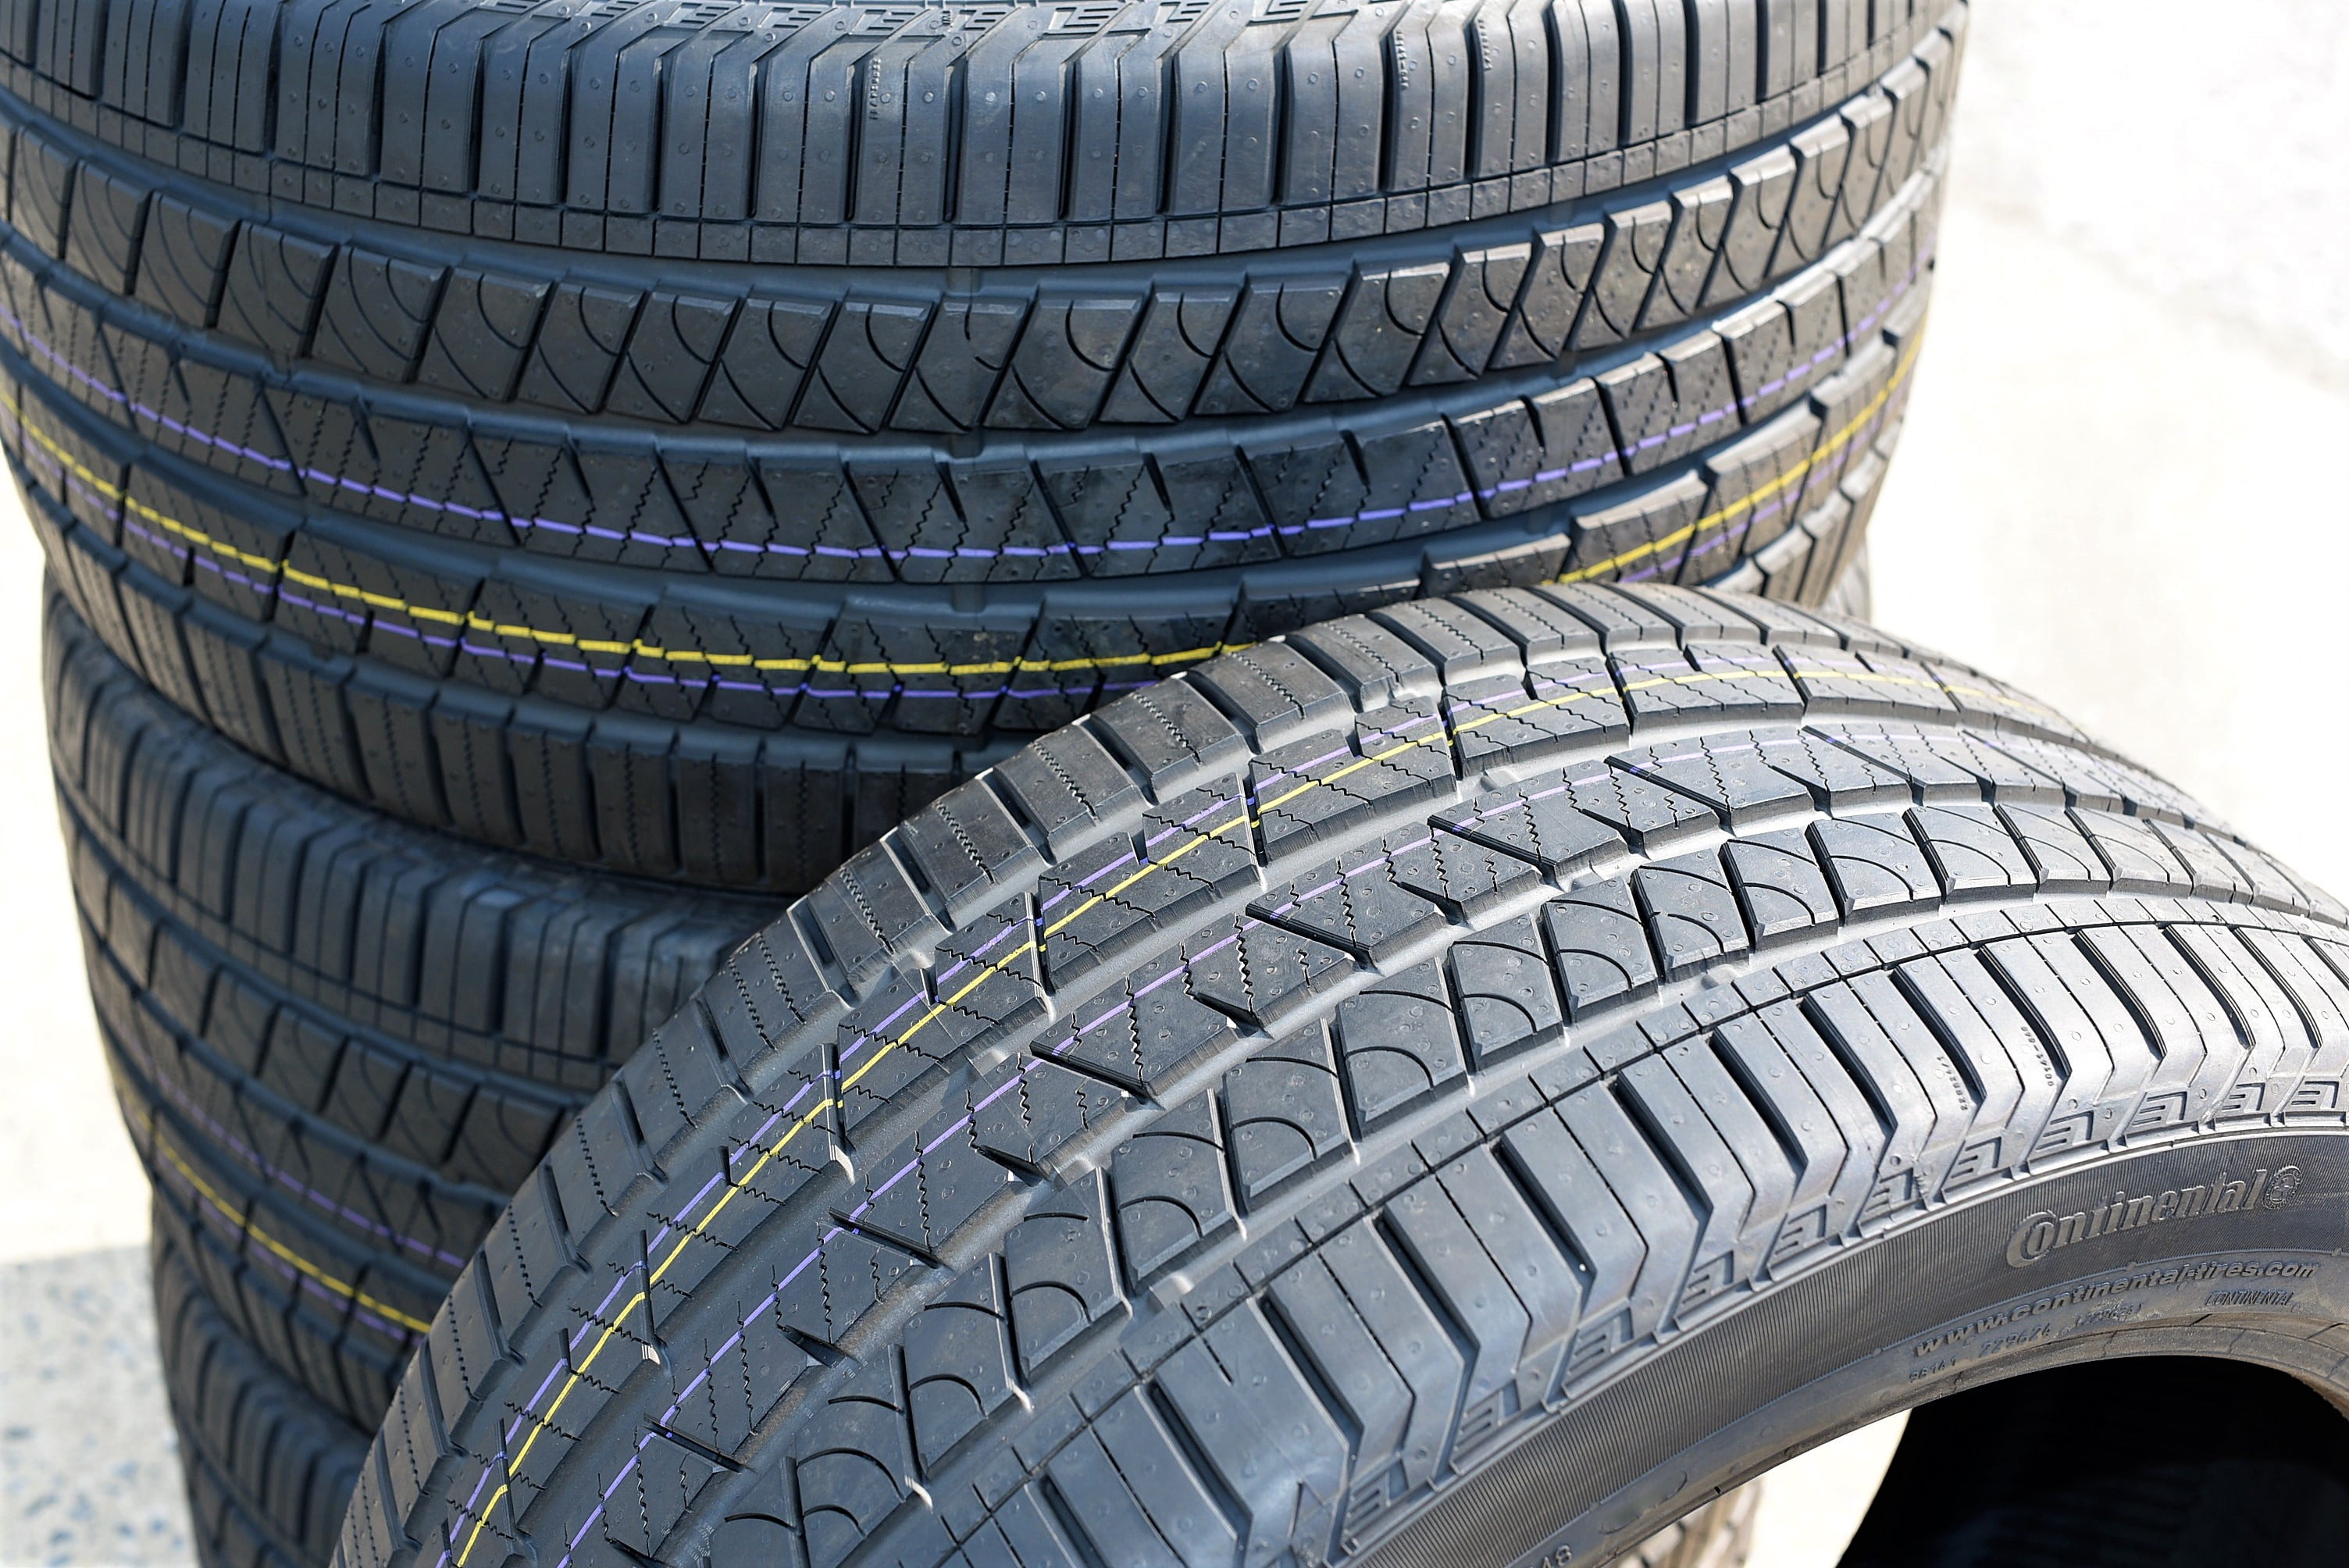 275/45R20 XL A/S Fits: 2000-03 CrossContact (T1) Ford F-150 LX xDrive40i, Continental 110V Sport Tire 2019 ContiSilent BMW X5 Edition Harley-Davidson